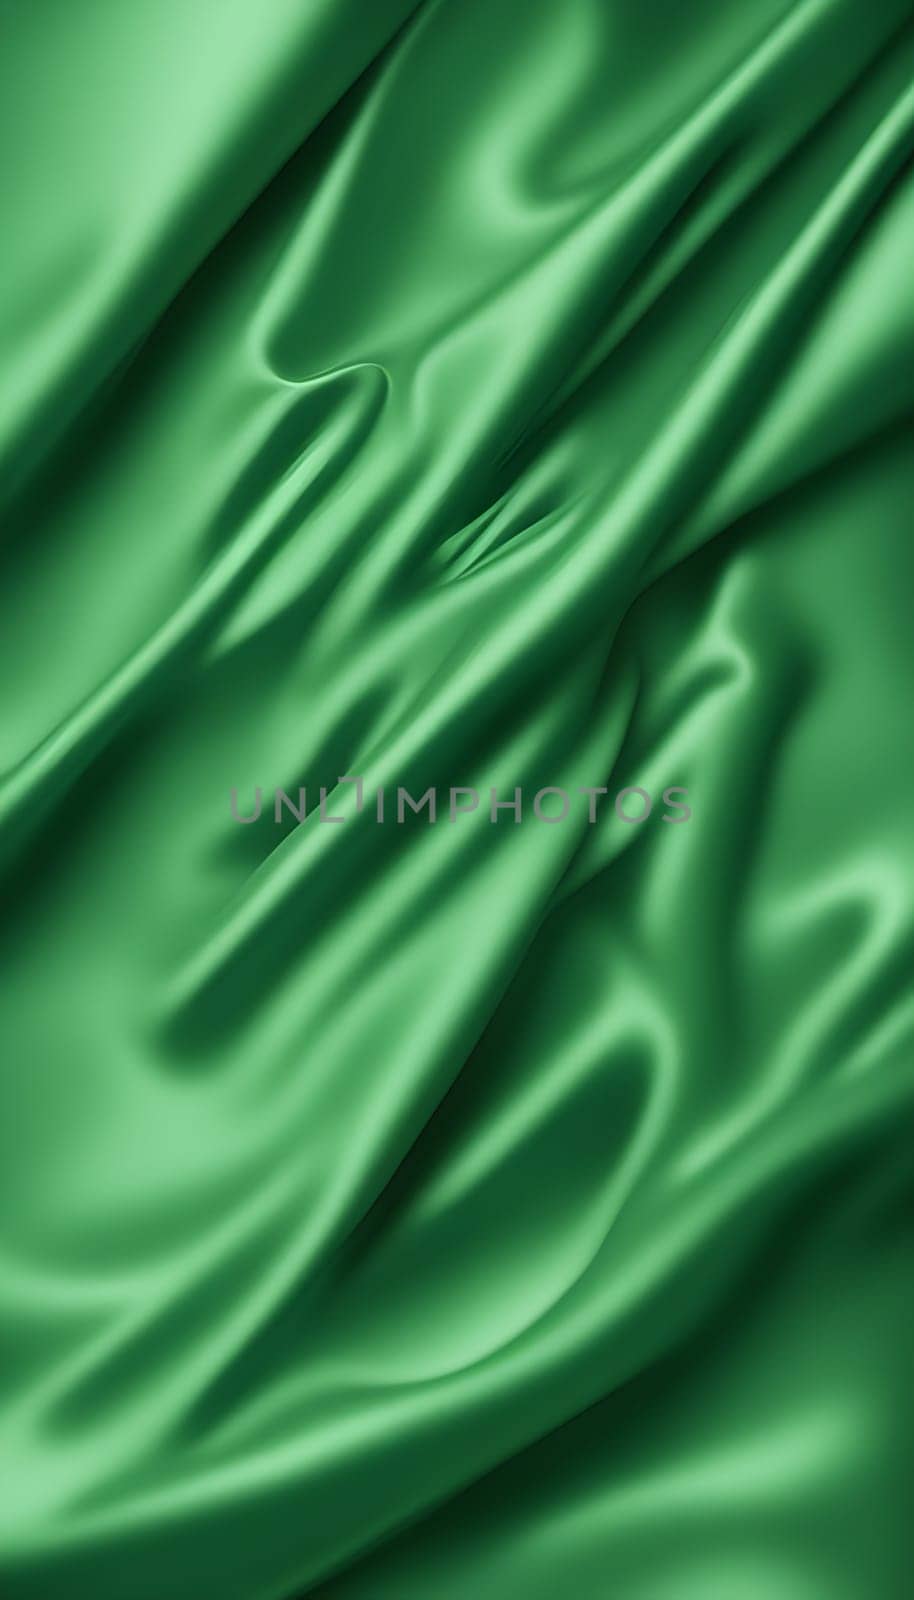 Technology background realistic color background folds of fabric or overlay for product or in shades of metallic green color by rostik924